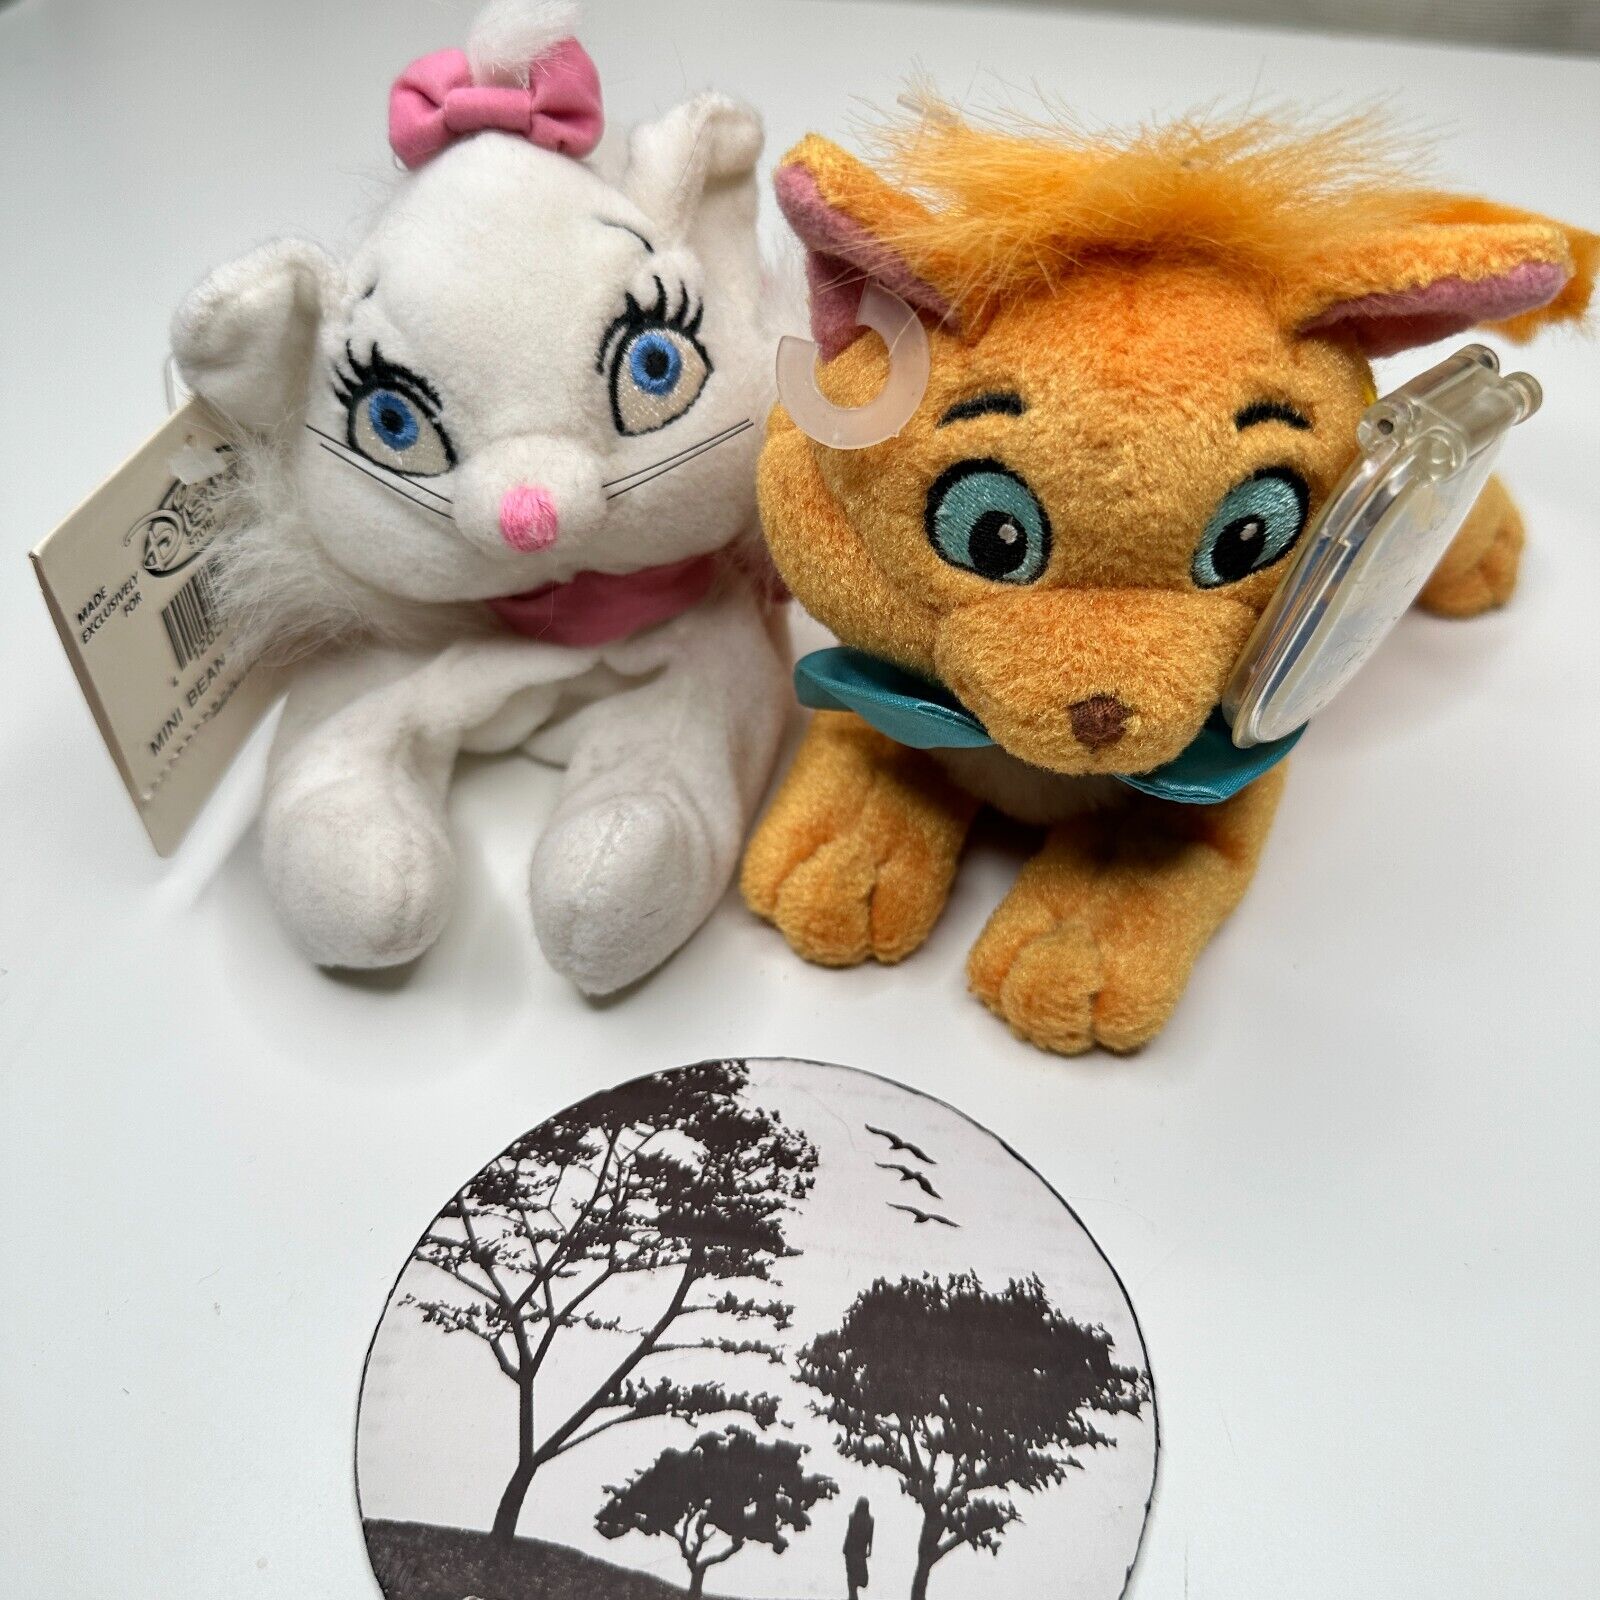 Disney's The Aristocats TOULOUSE Star Bean + Disney Store Marie - NEW WITH TAGS Disney 69706